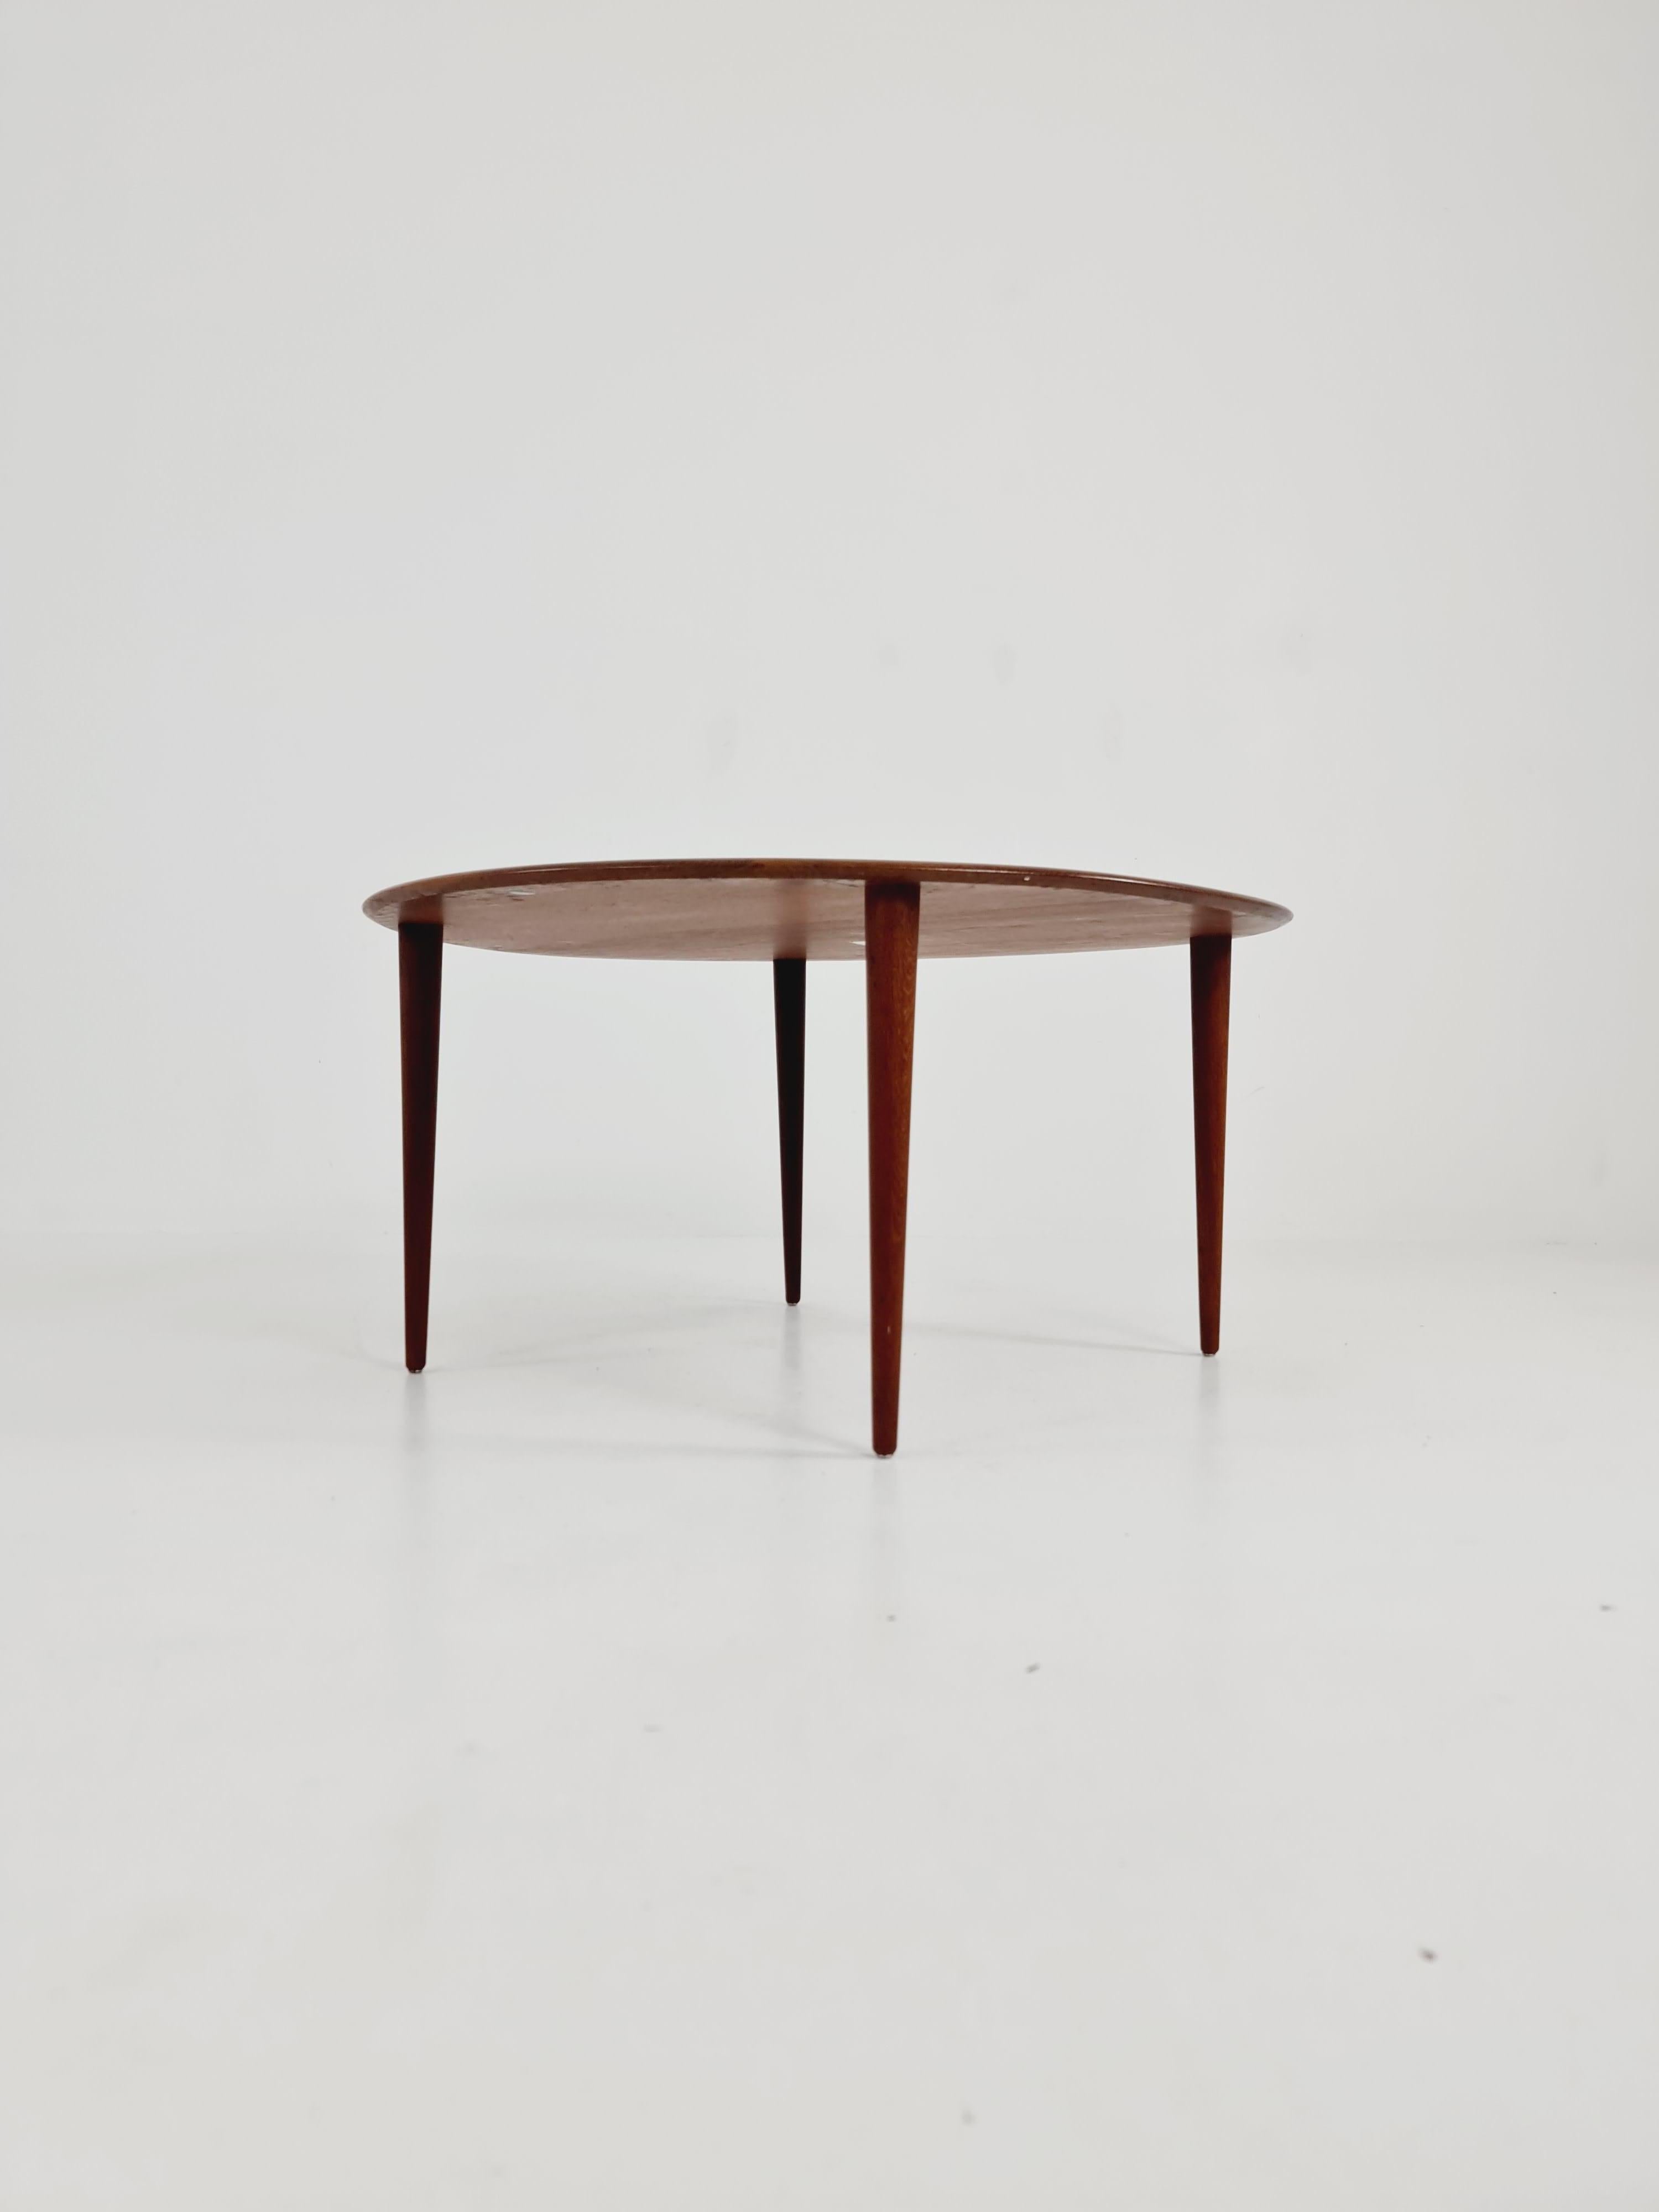 Danish Teak Coffee Table by Peter Hvidt &Orla Mølgaard  for France and søn , 1960s

Design year: 1960s 

Made in Denmark by Peter Hvidt &Orla Mølgaard  for France and søn

Dimensions: : 98  D x 98   B x 48  H cm

It is in great vintage condtion,